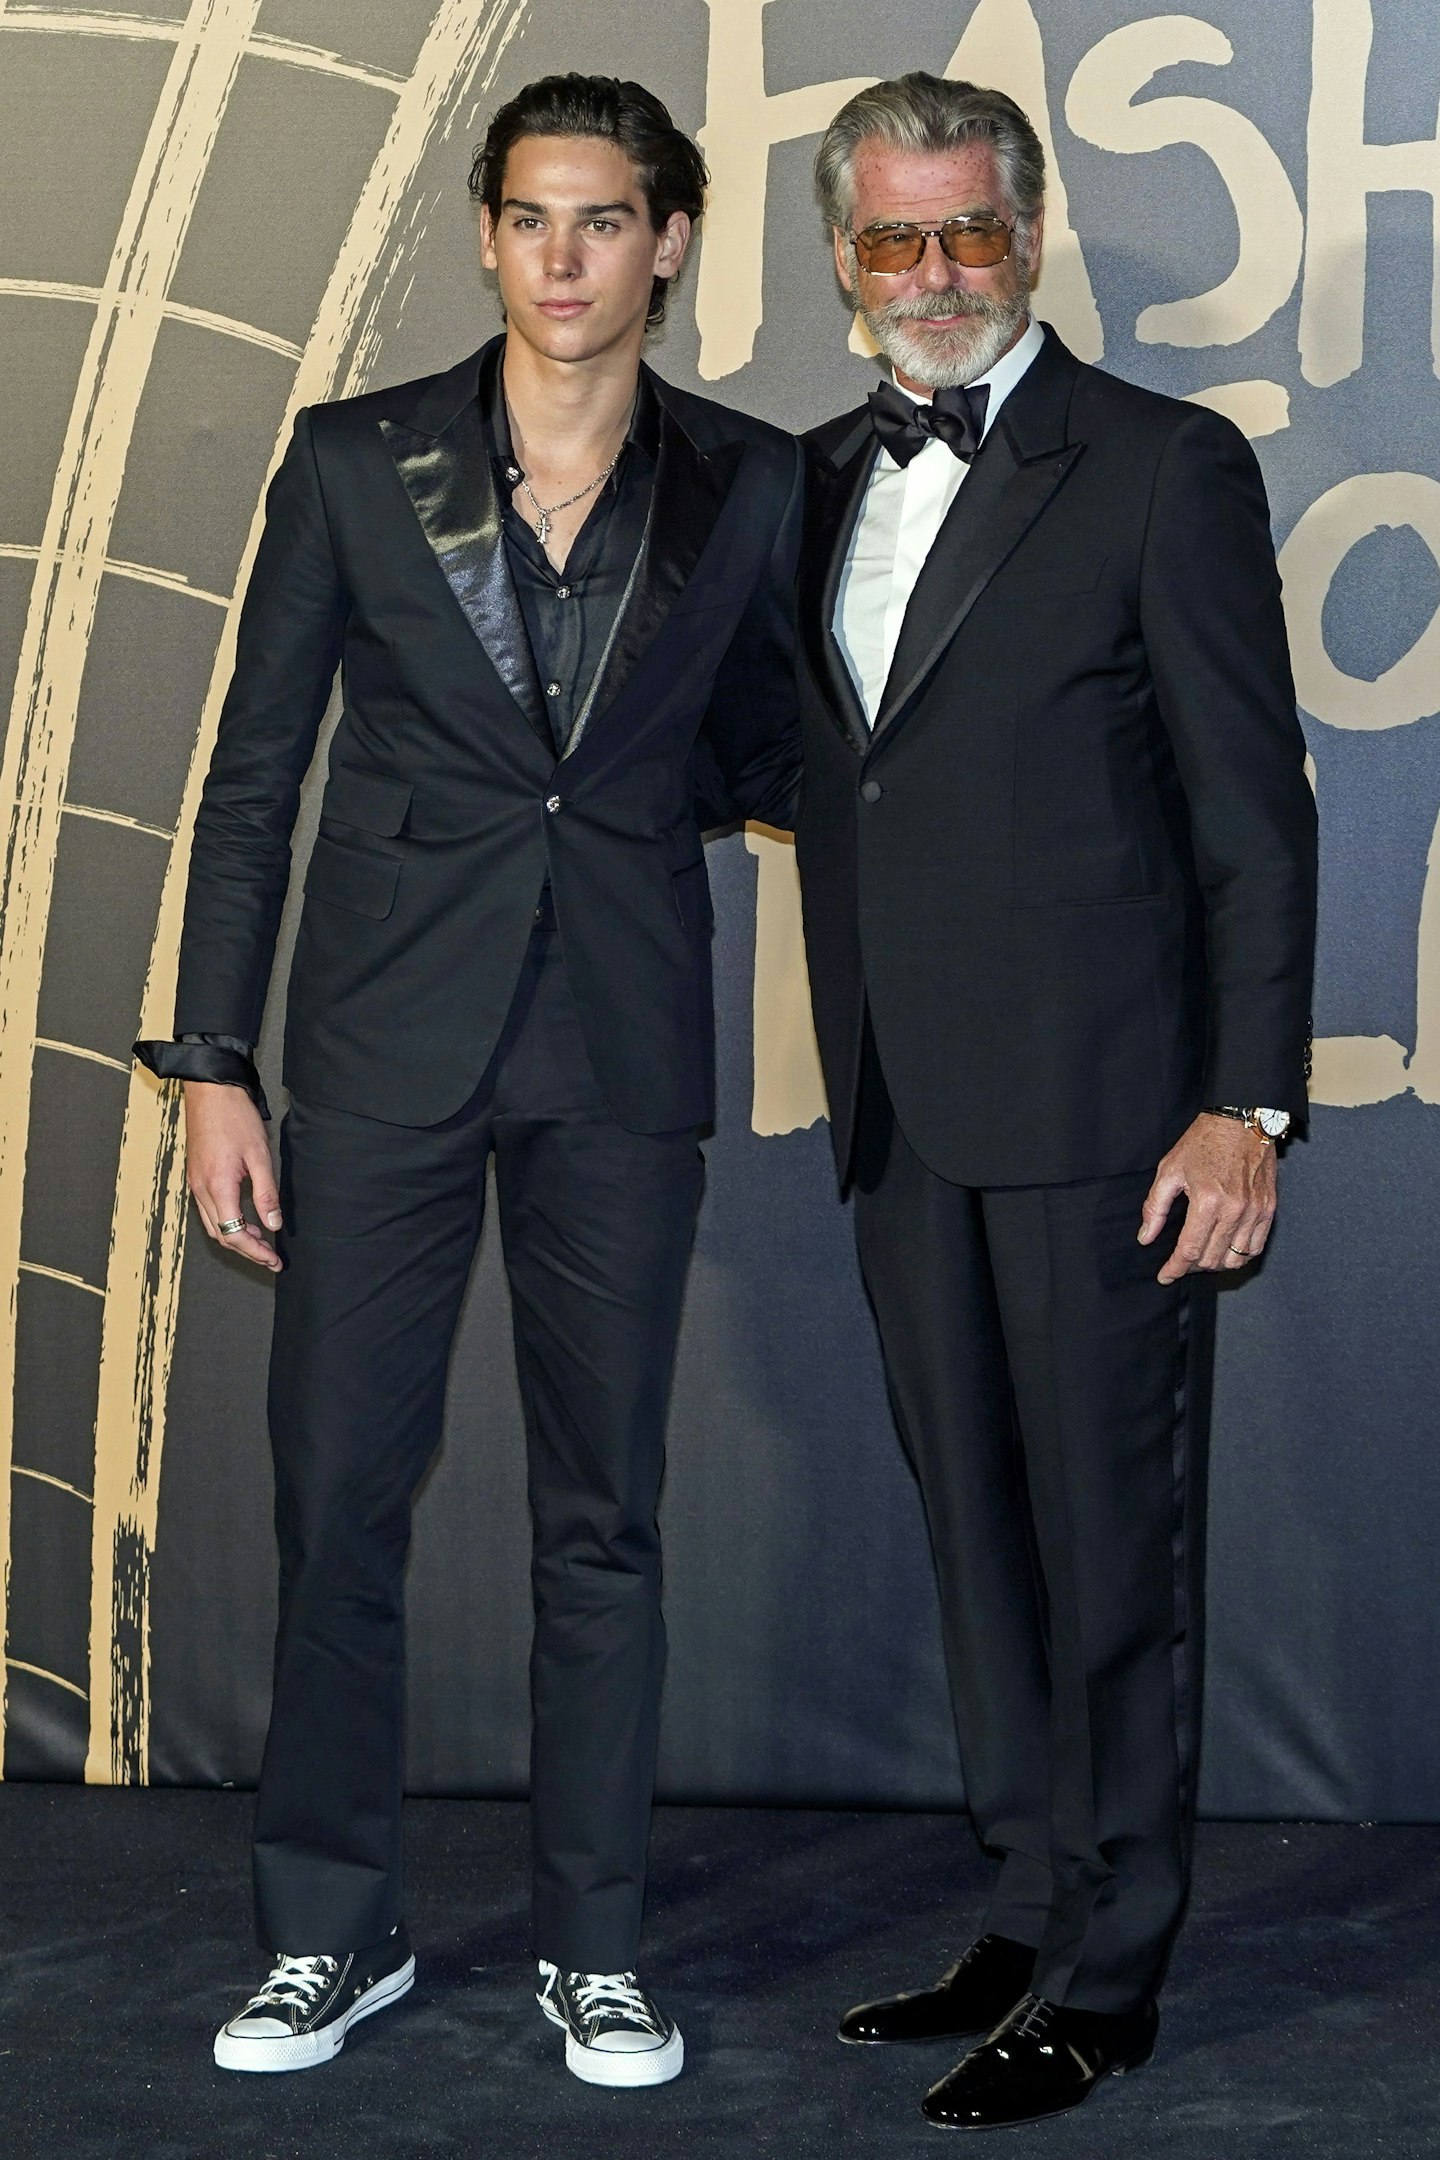 Pierce Brosnan with his son Paris, who modelled in the Fashion For Relief show